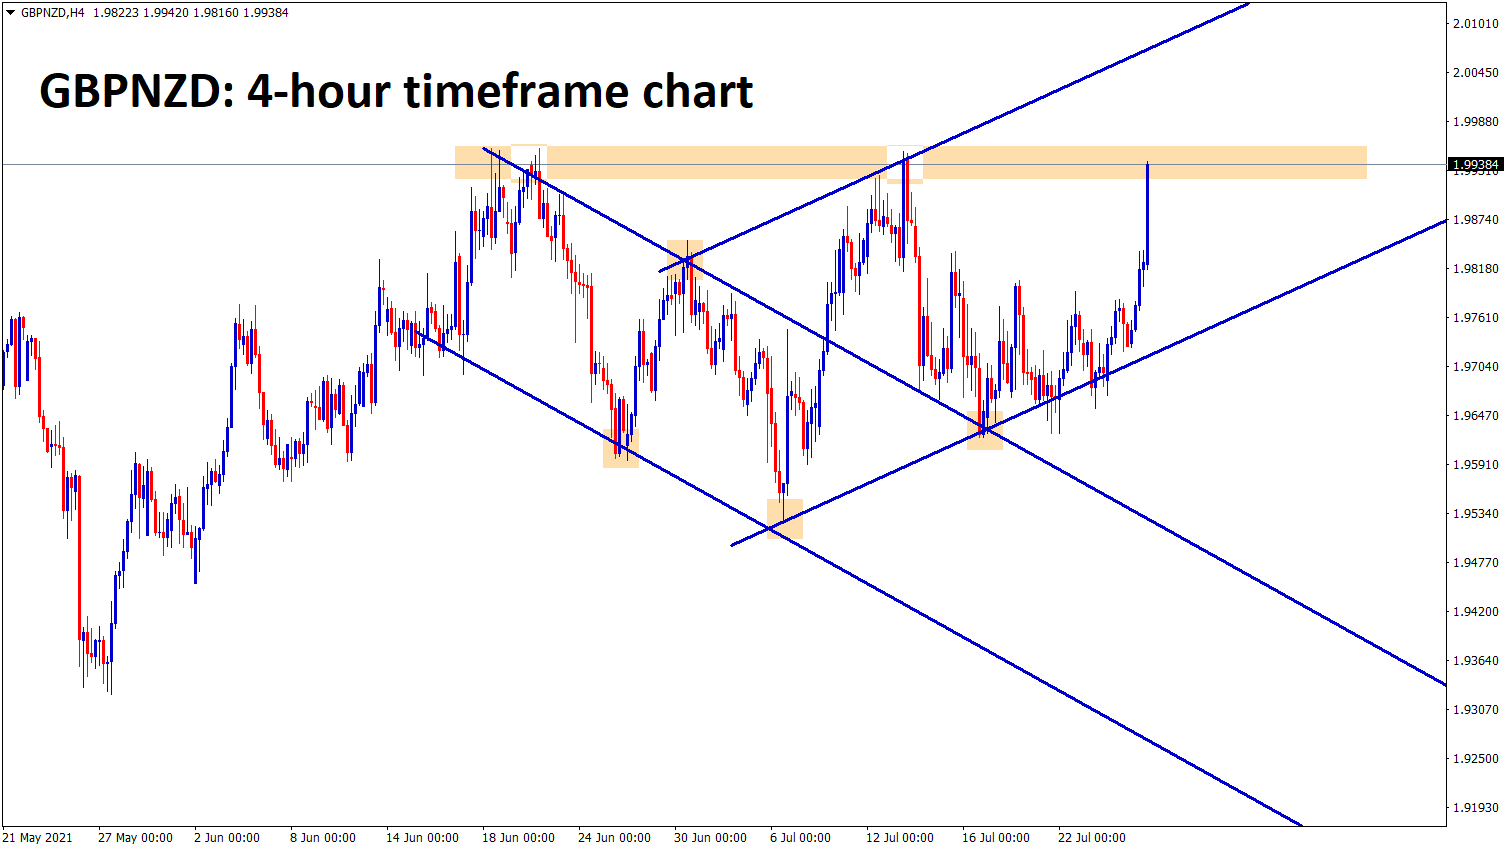 GBPNZD is moving in an uptrend channel range and it reached the resistance level now